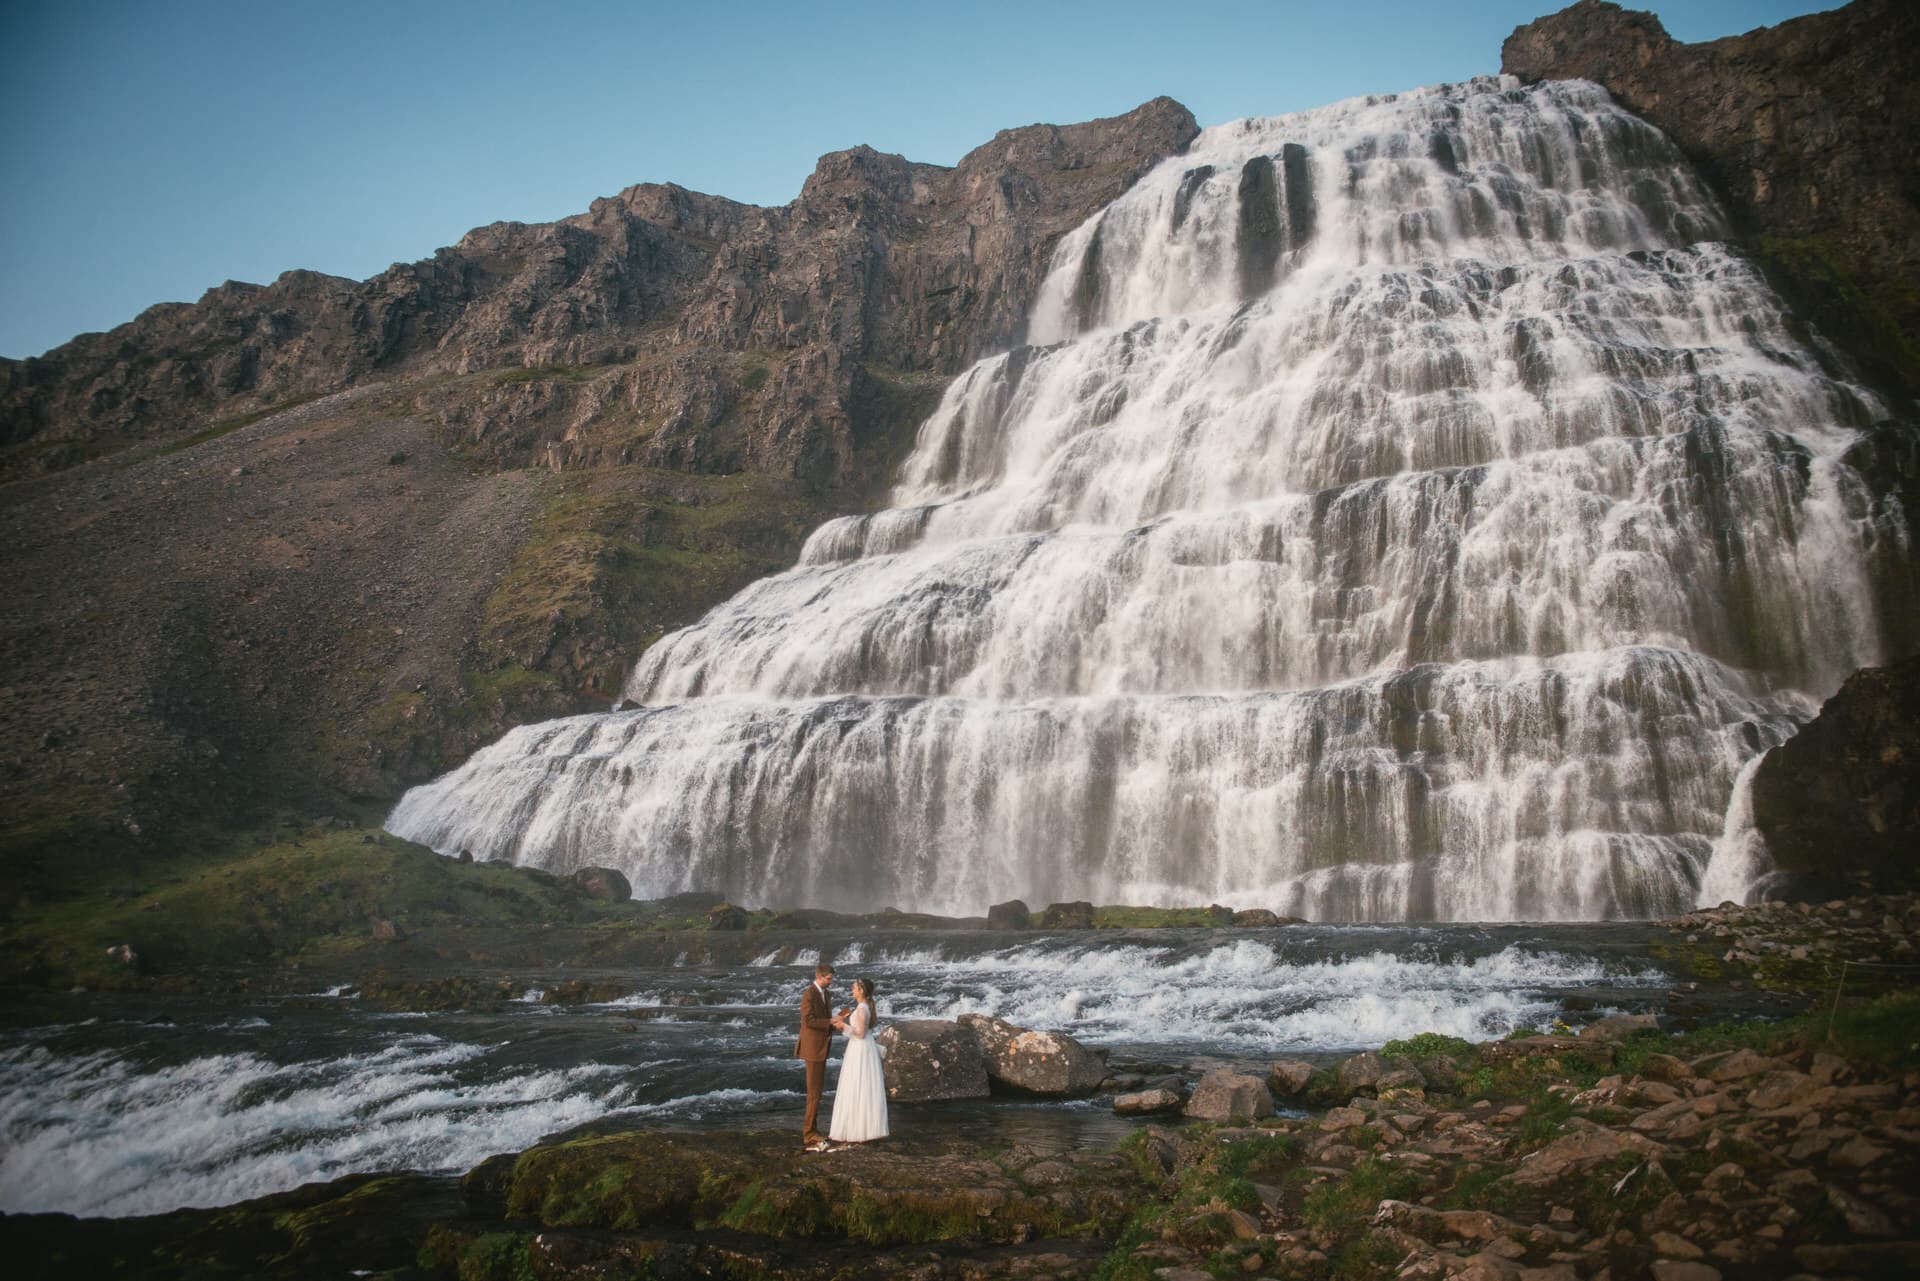 Intimate exchange of vows with a serene fjord and mountainous terrain as witnesses.